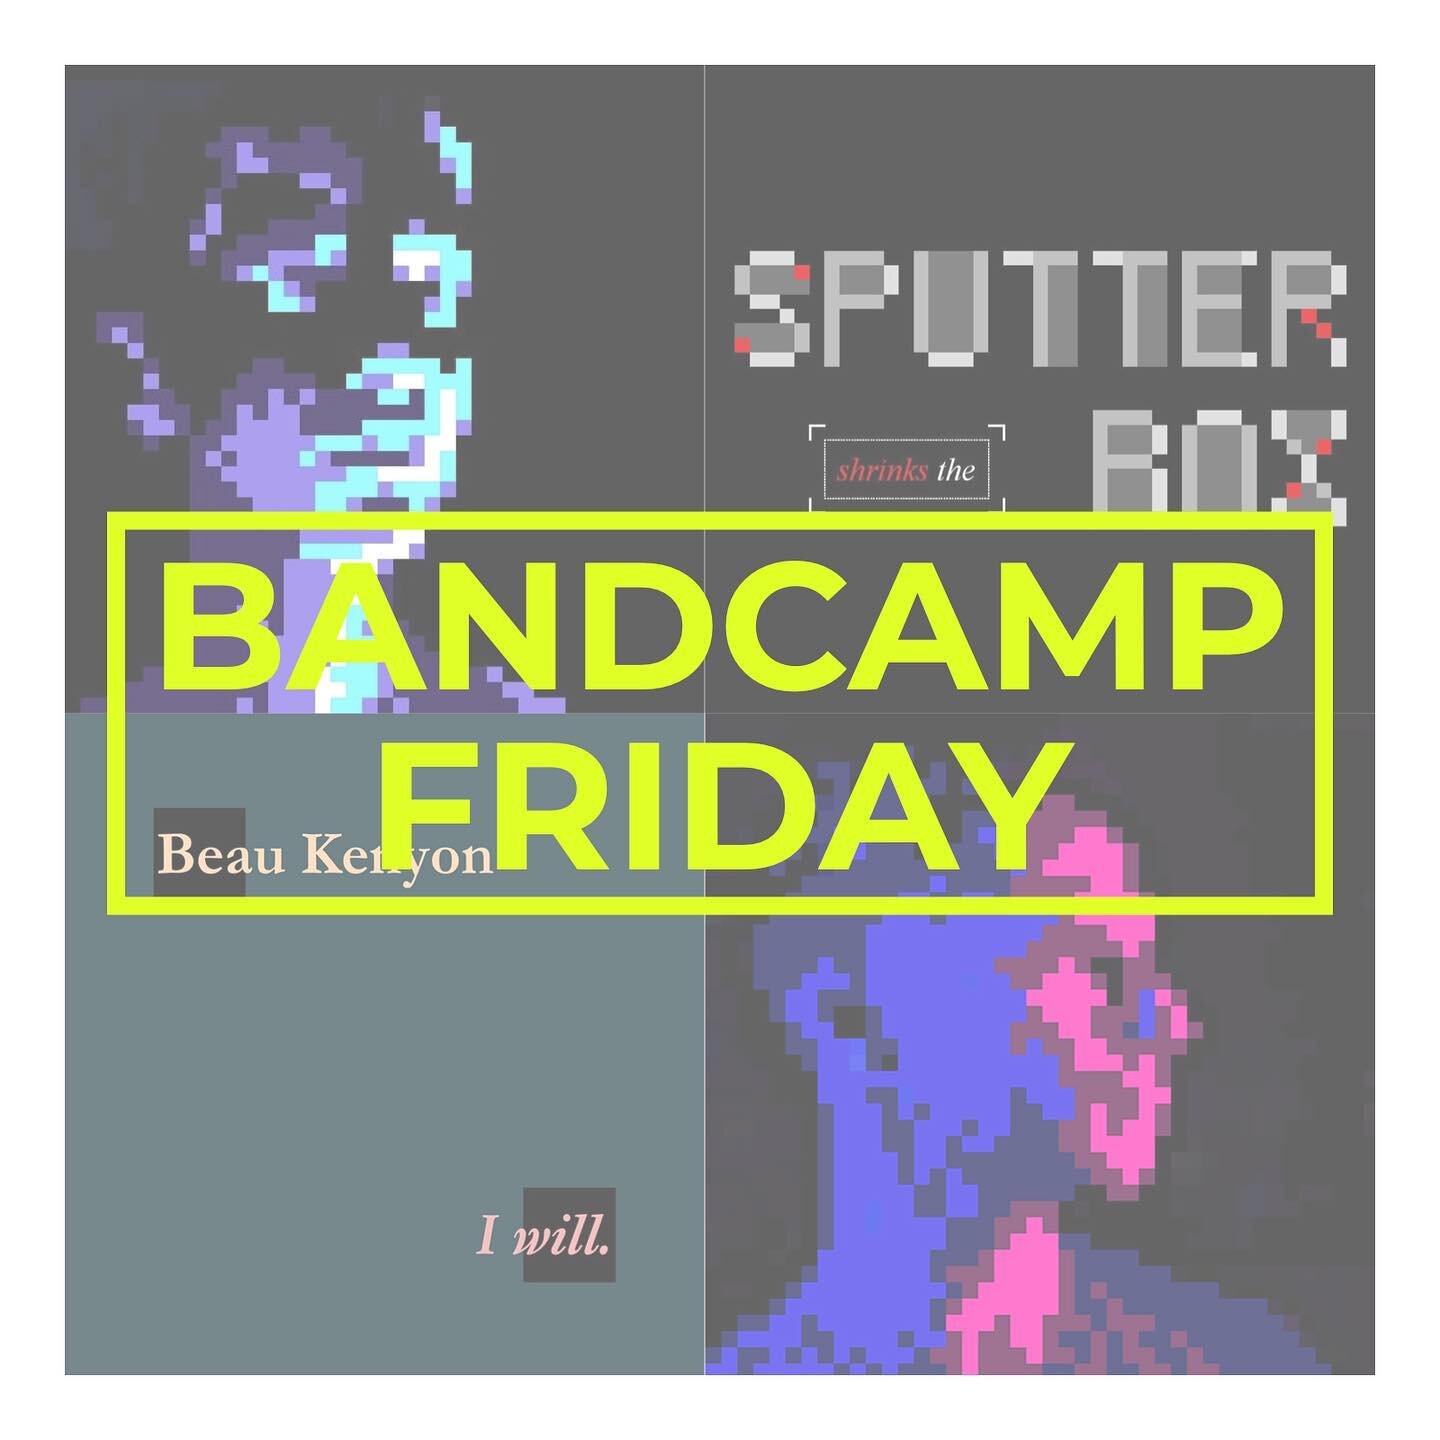 What&rsquo;s that? Bandcamp Friday AND a Sputter Box discography deal?! Today only! Save 25% on our entire Bandcamp discography. And on top of that, Bandcamp is giving 100% of the proceeds to the artists - which in our case means the musicians of Spu